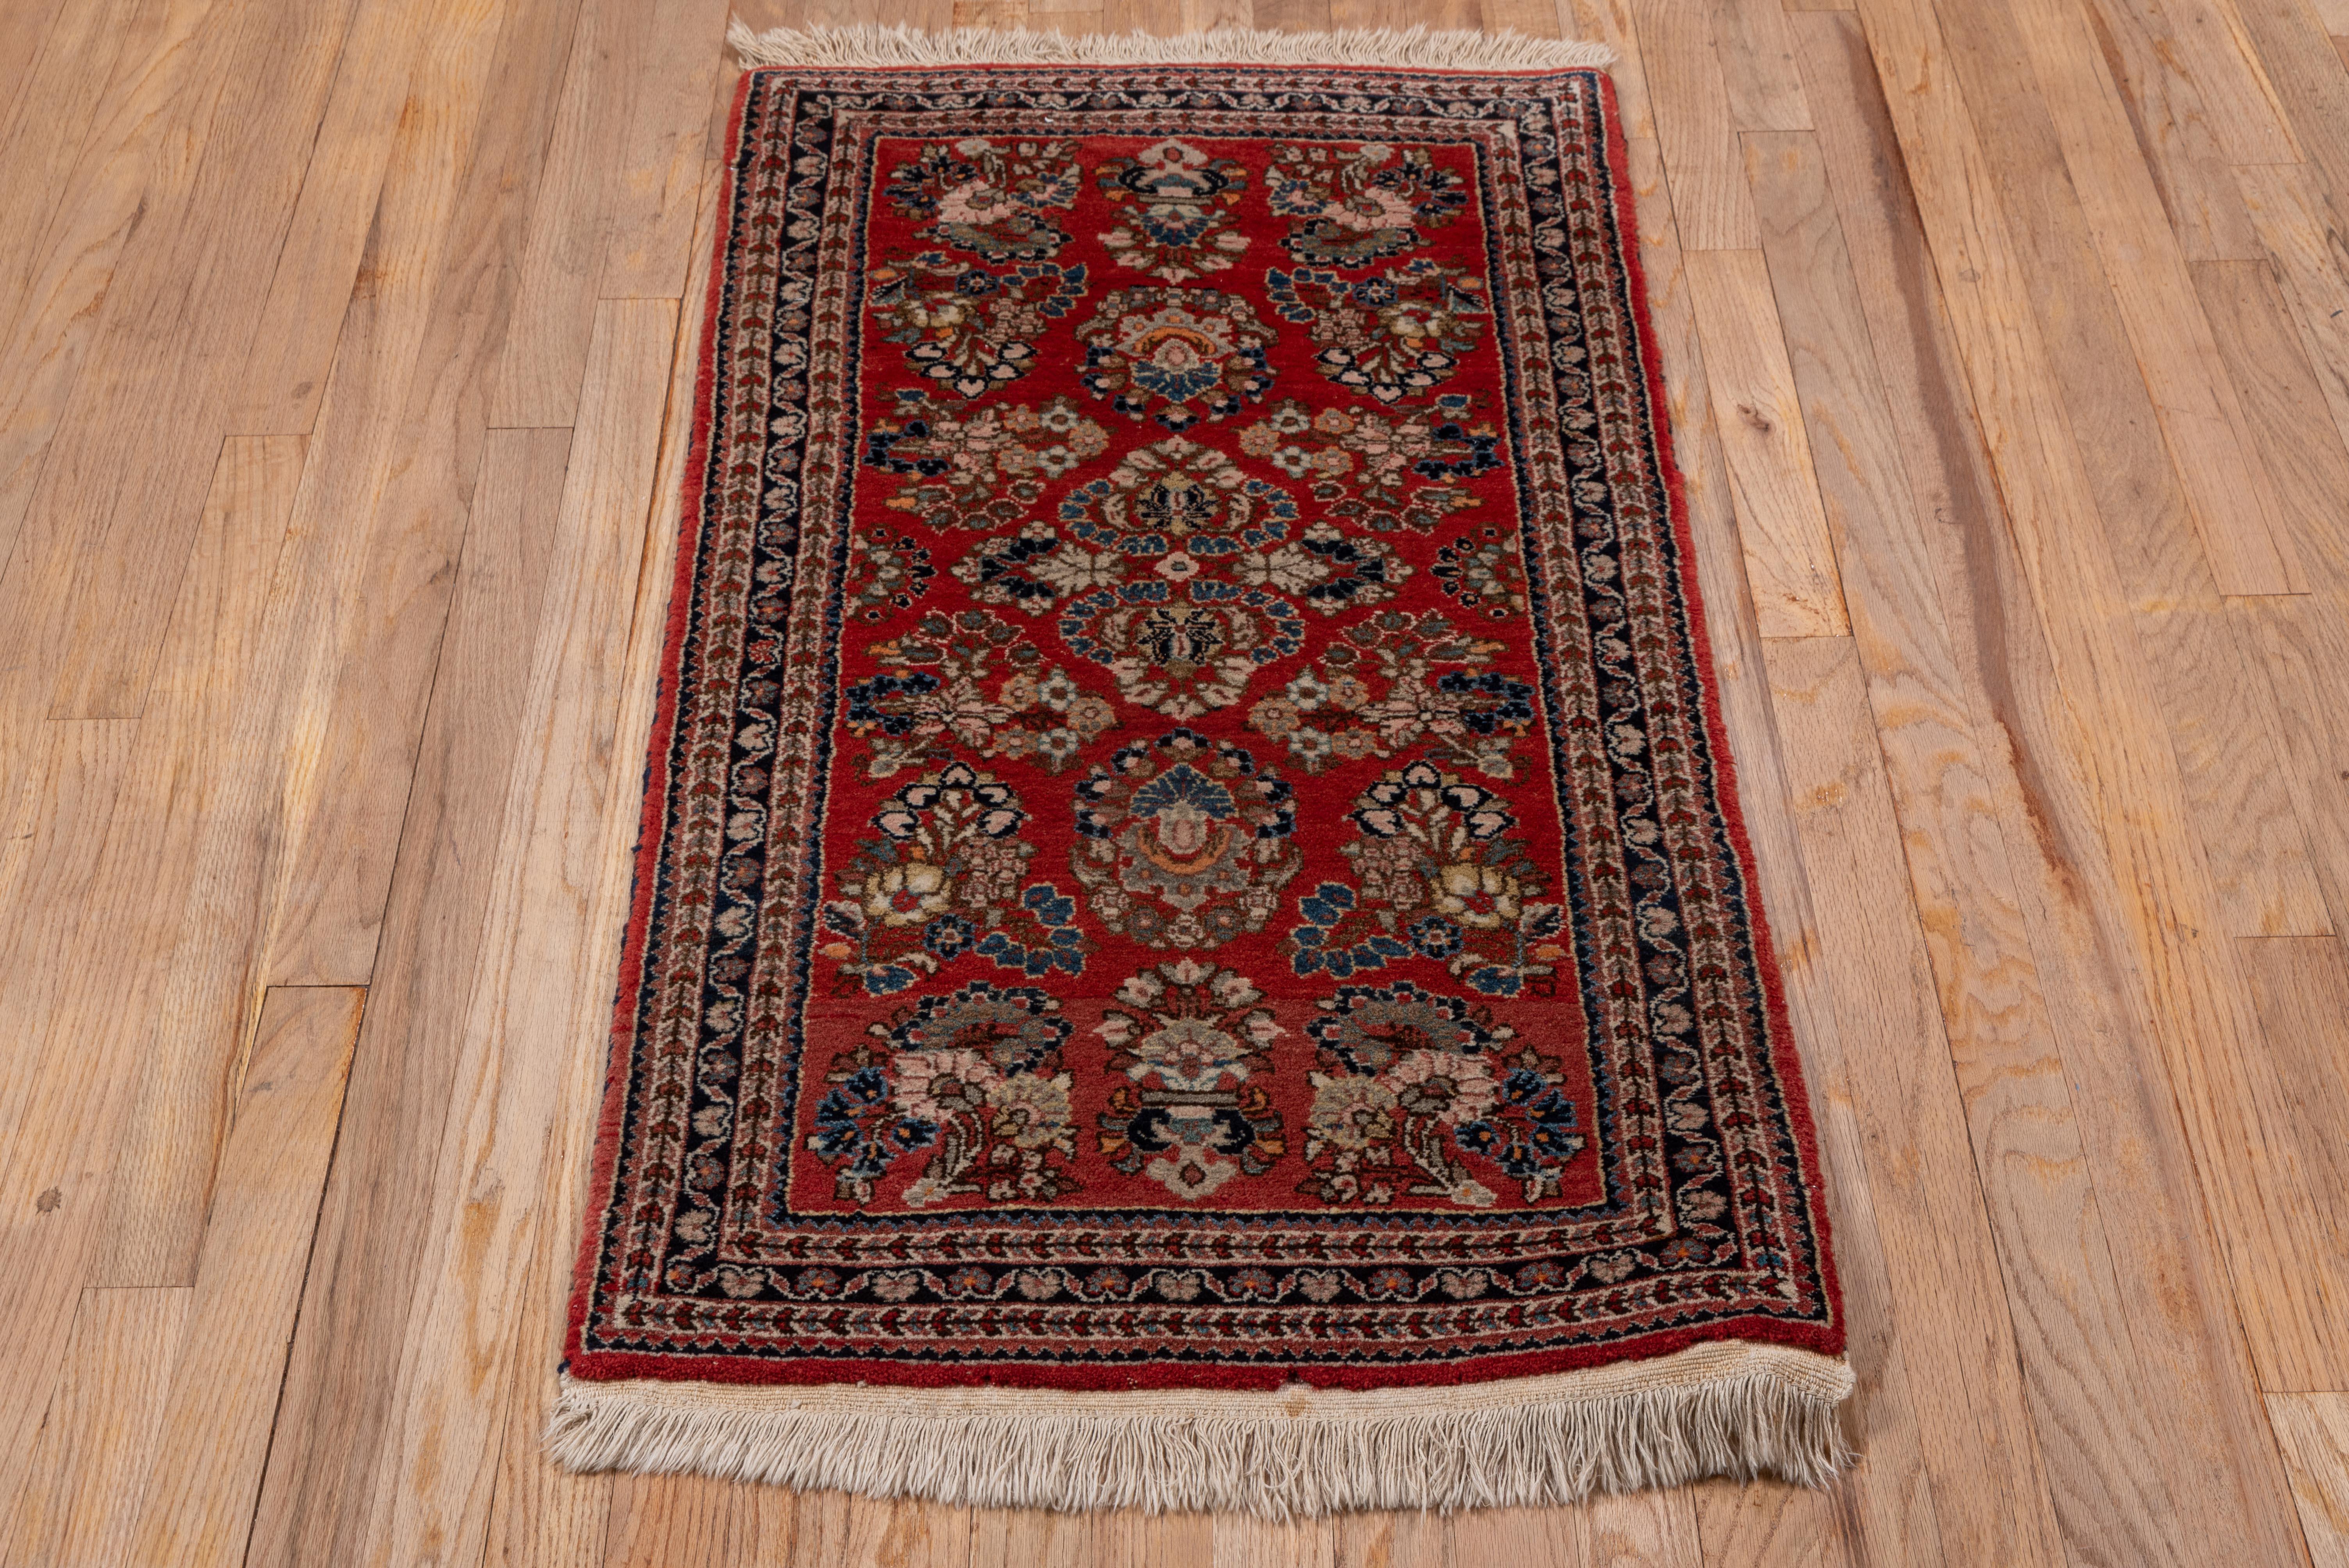 Sarouk Rug in Formal, Traditional Persian Style - Bright Red with Florets For Sale 1